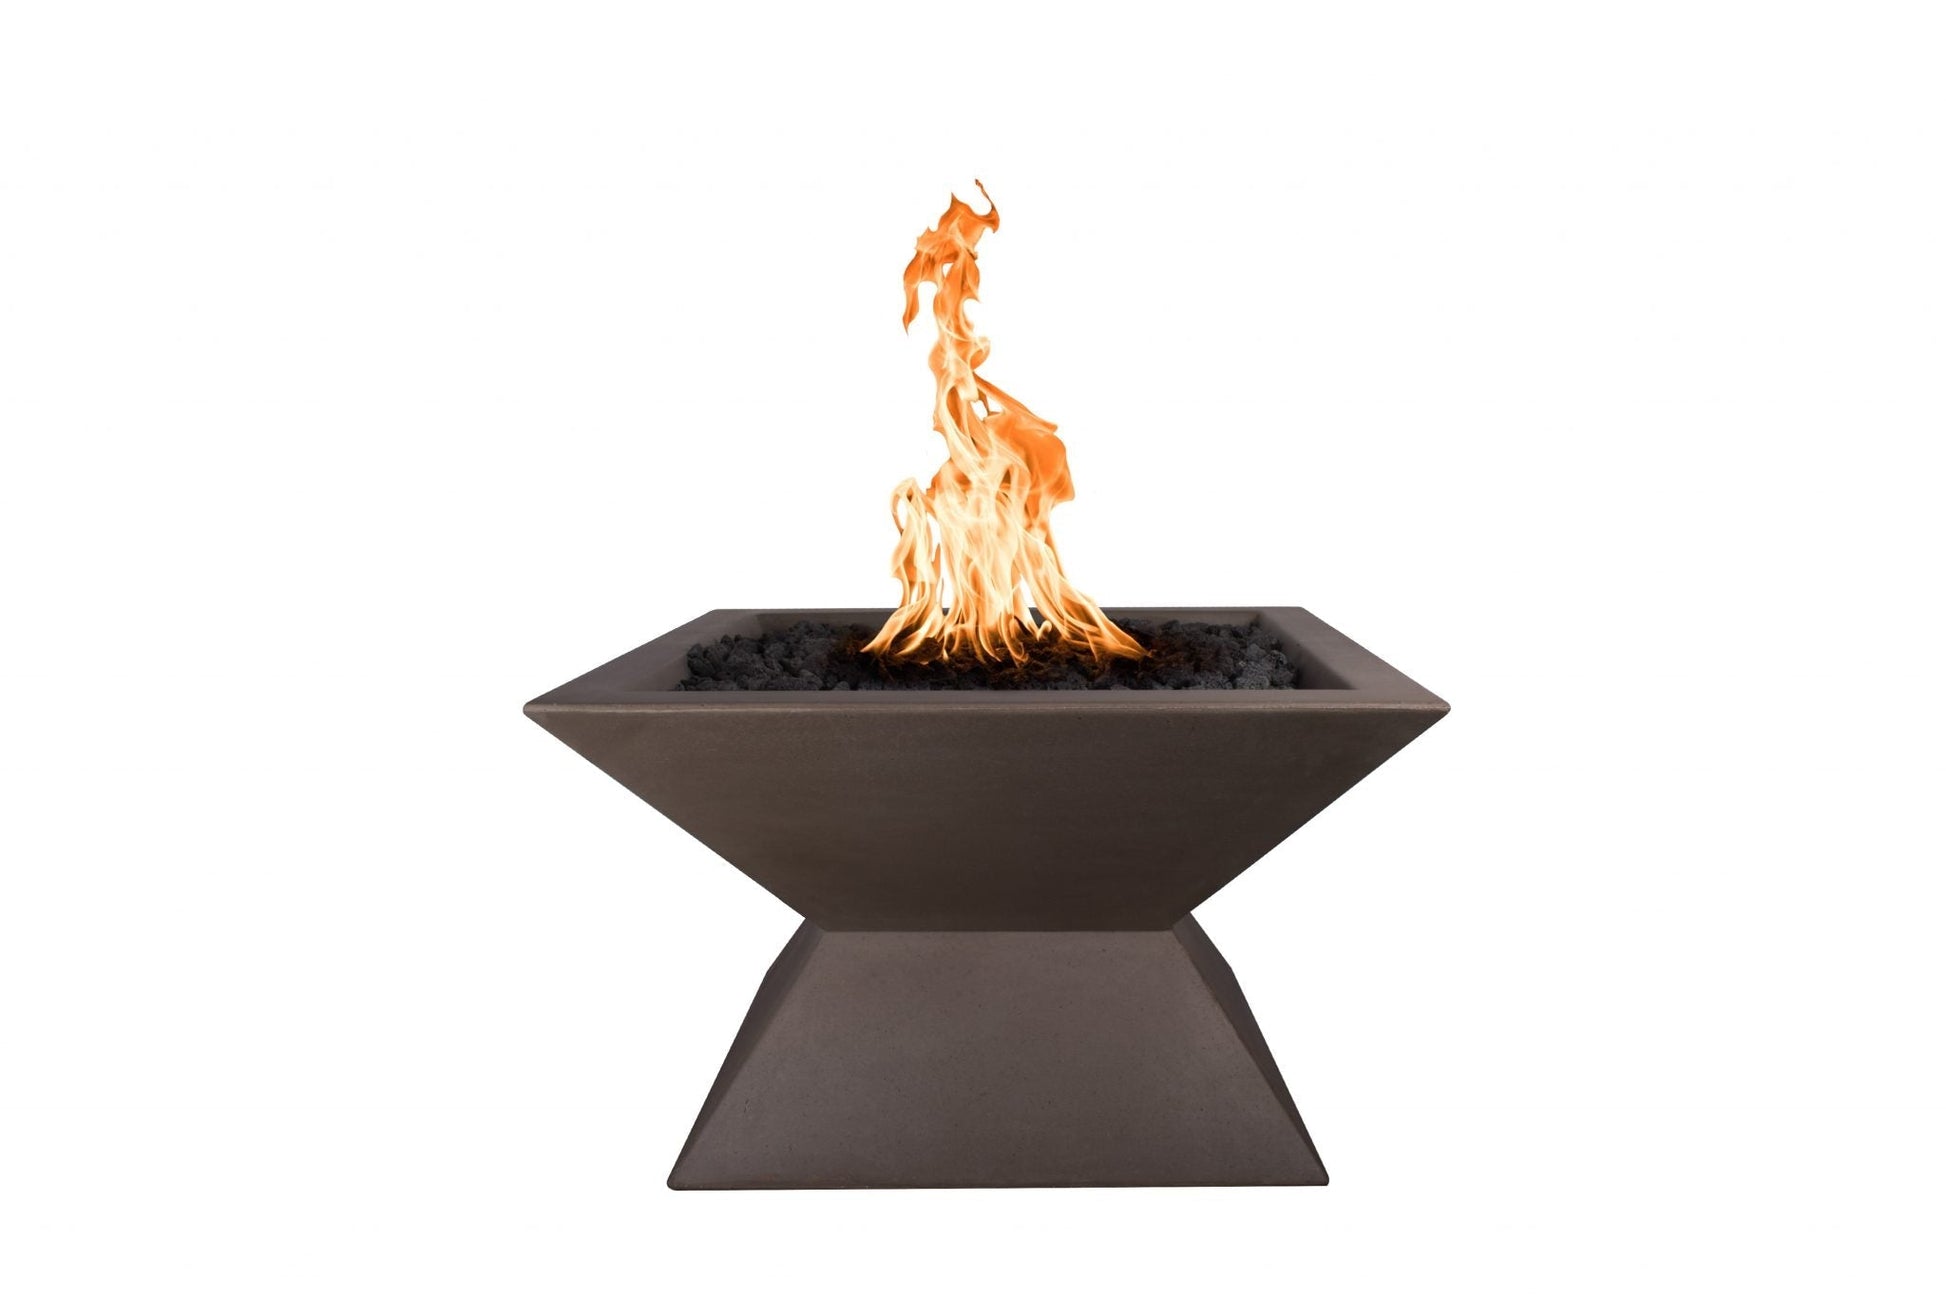 The Outdoor Plus Square Uxmal 30" Rustic Moss Stone GFRC Concrete Natural Gas Fire Pit with Match Lit Ignition